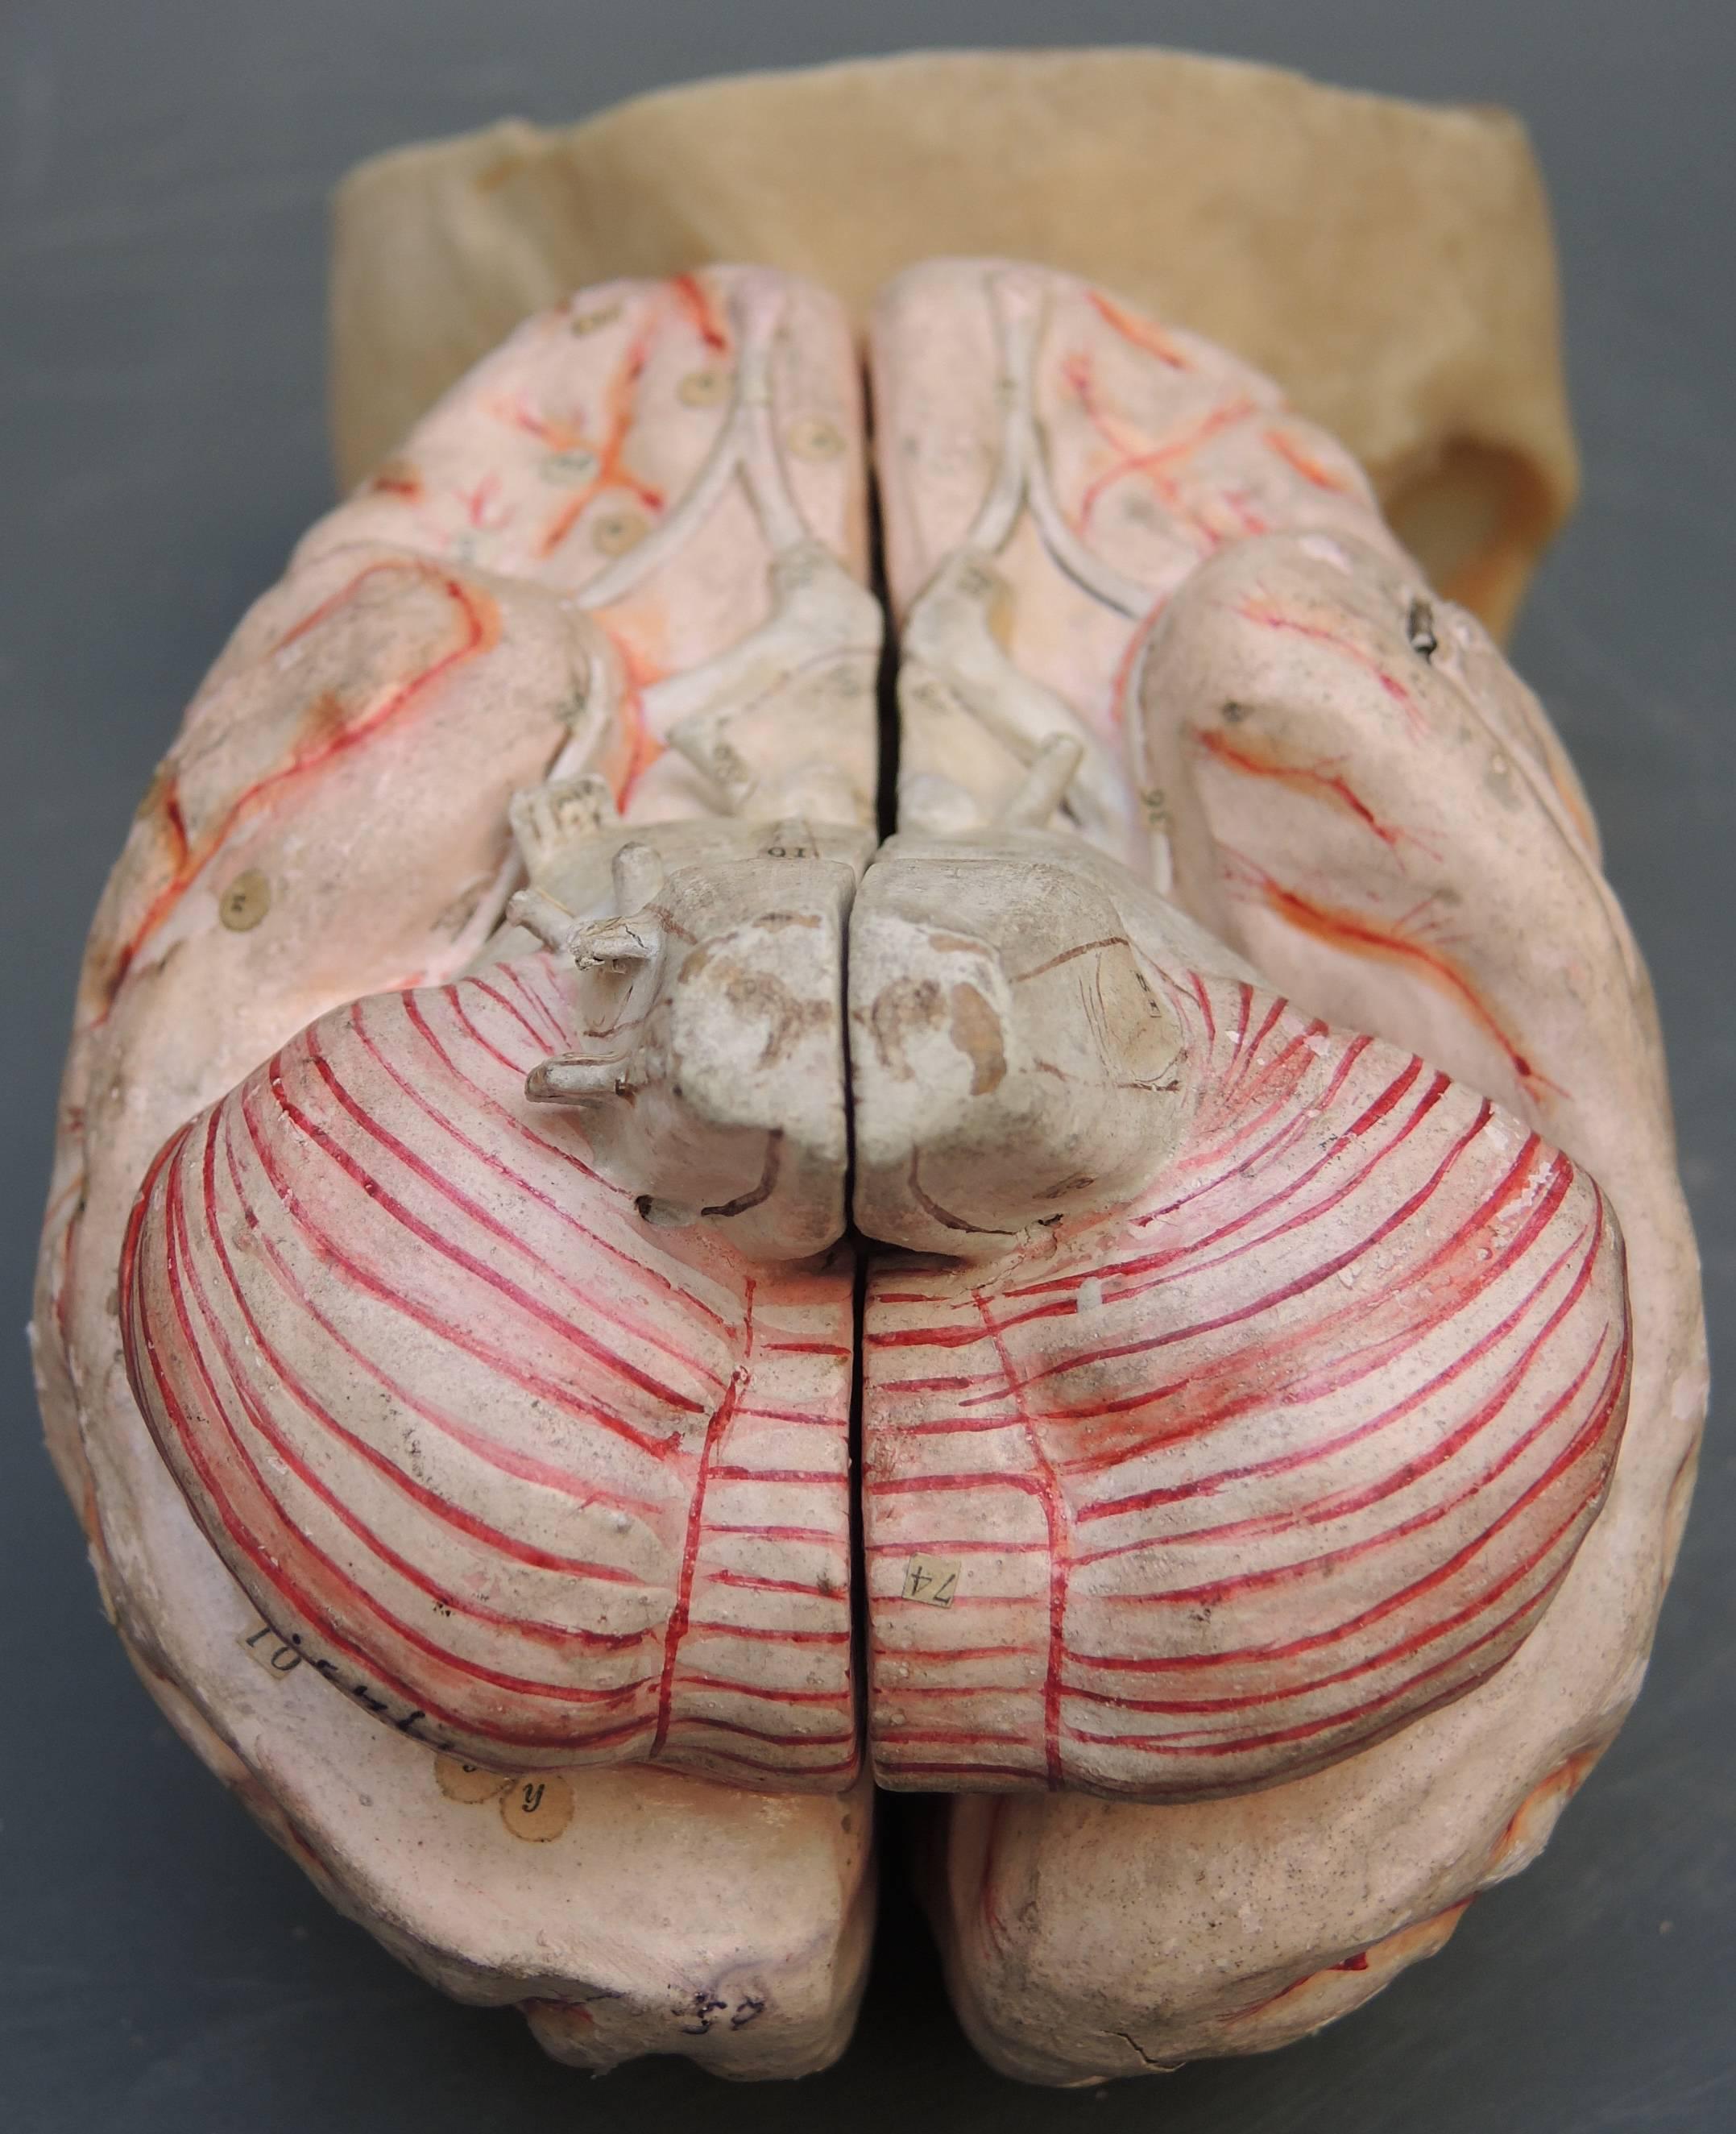 An extremely rare papier mâché model of the brain in a resin skull. Signed and dated Dr. Auzoux 1949. All original parts fully intact including the hand applied tags referring to the various parts. Completely hand-painted in extremely fine detail